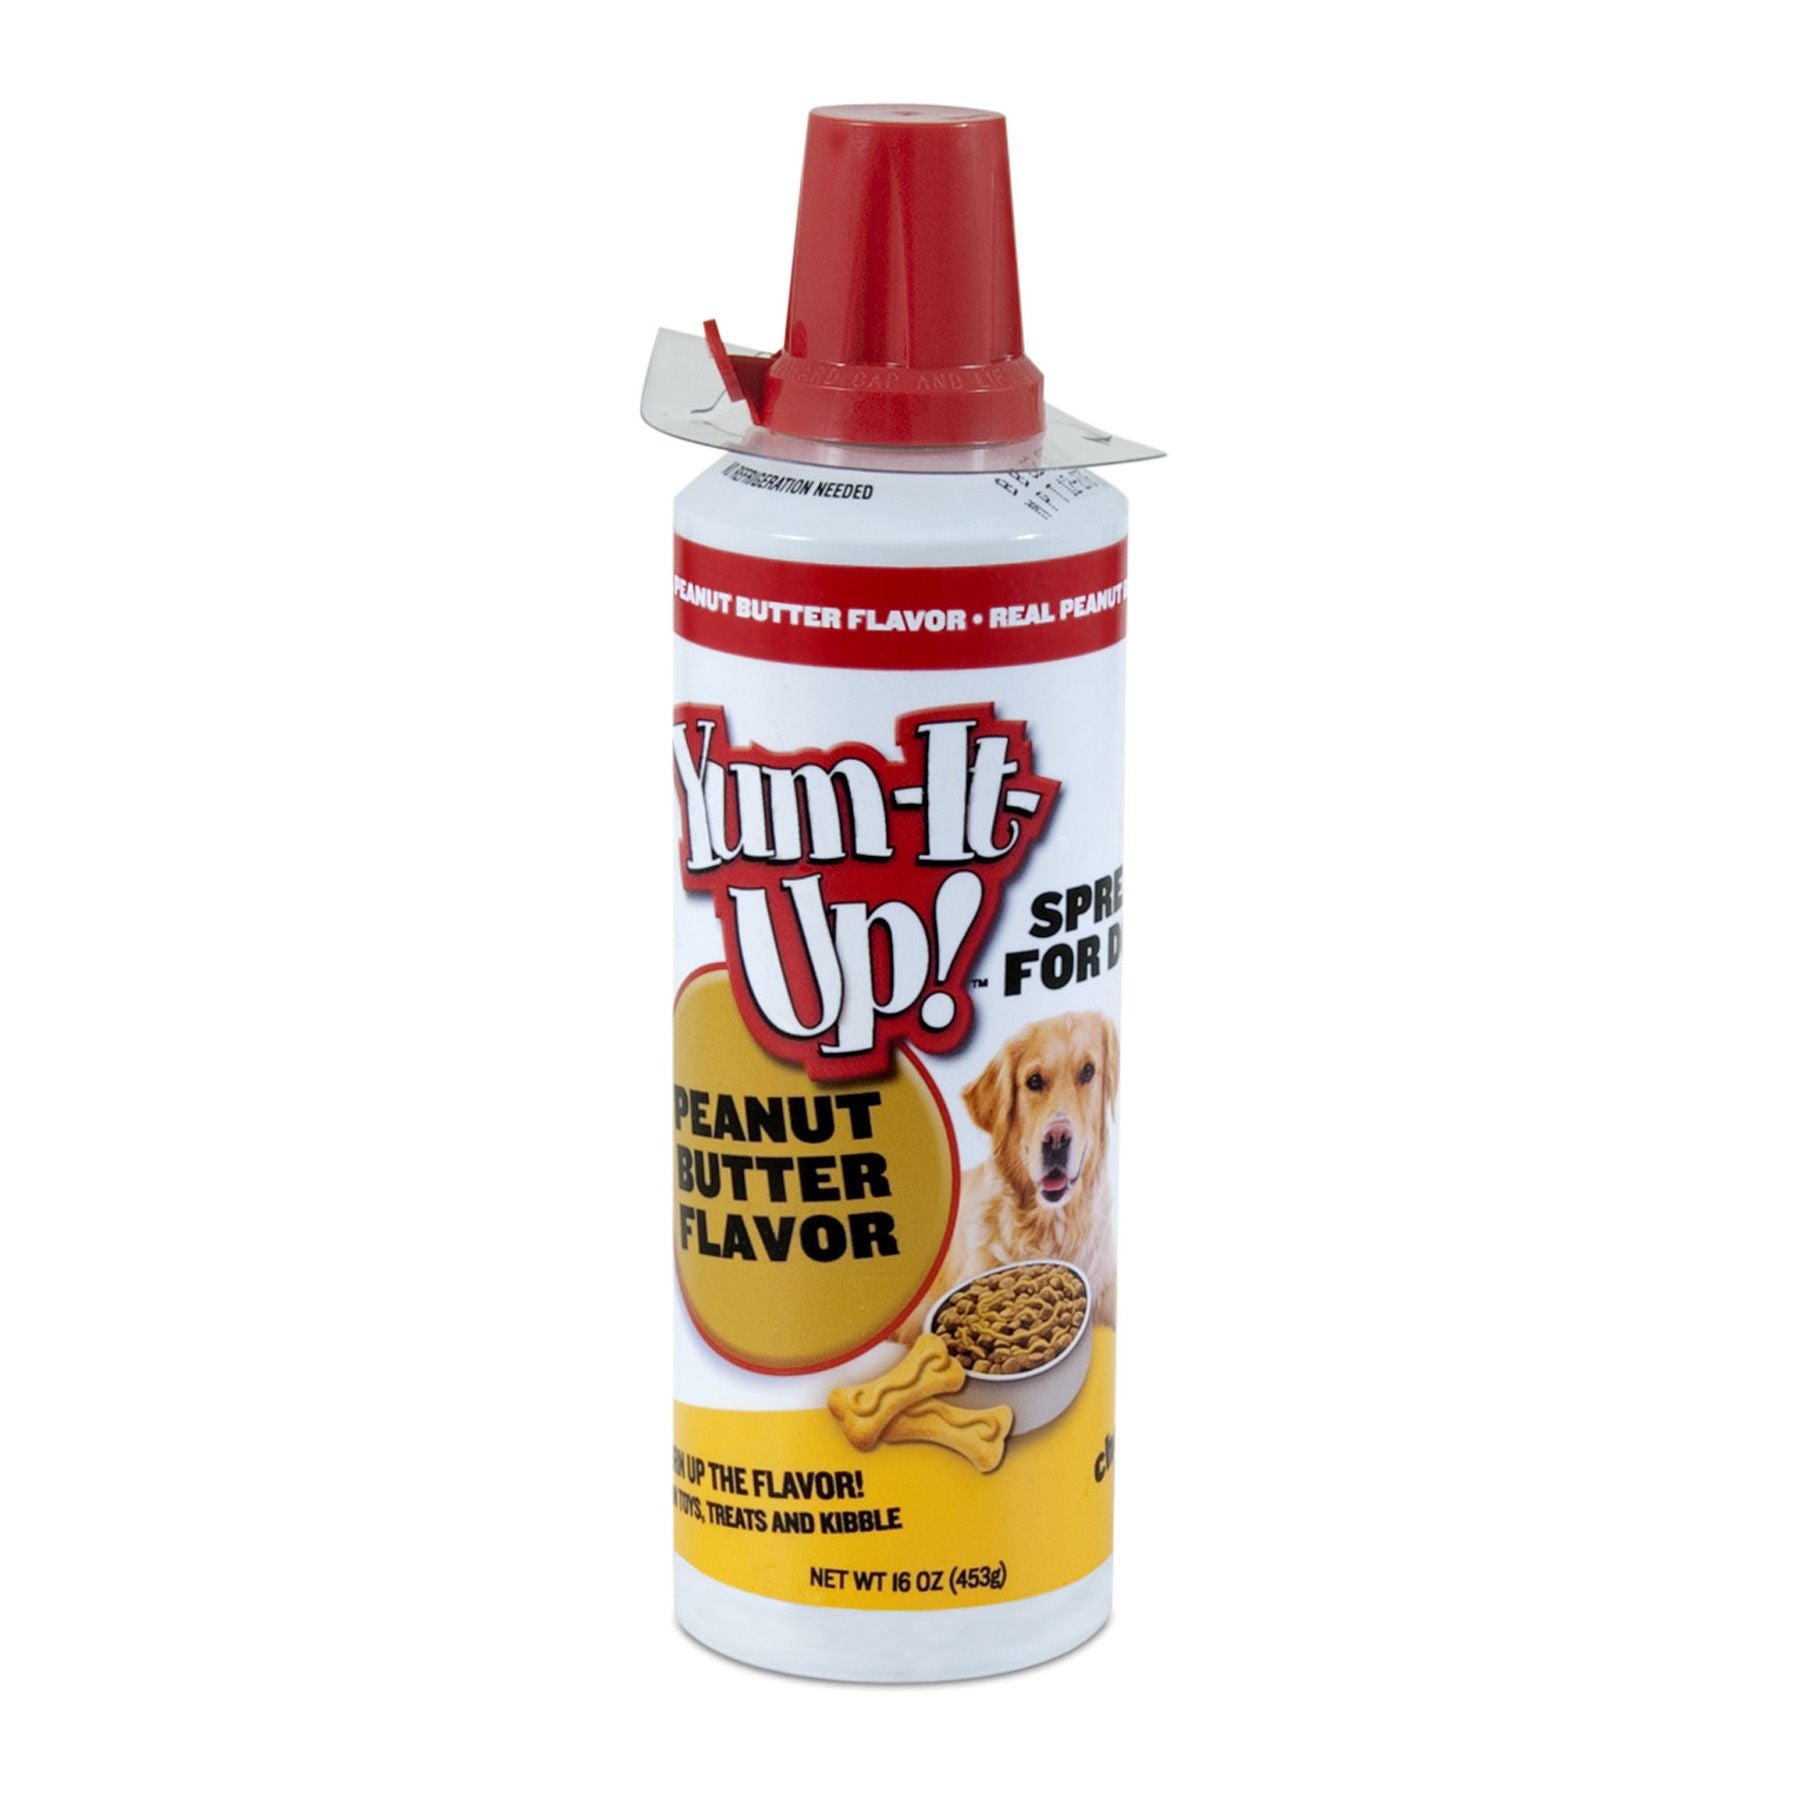 Yum It Up Peanut Butter Treat For Dogs 16 oz.